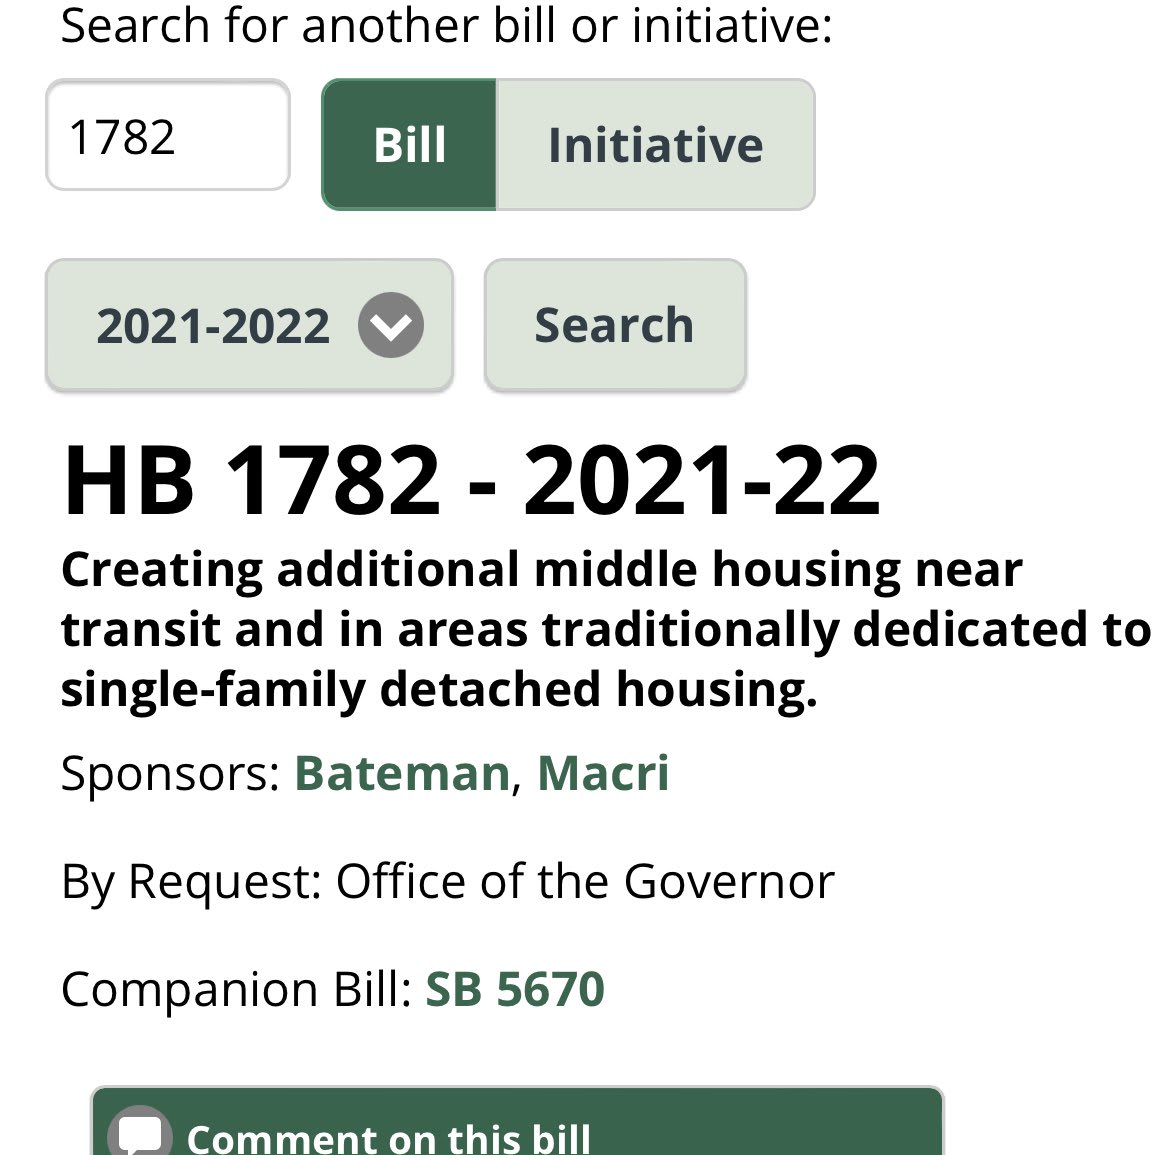 Companion bills to allow more housing near transit and more missing missing housing in single-family housing areas have been filed by Reps. Bateman and Macri and Sens. Das and Kuderer.